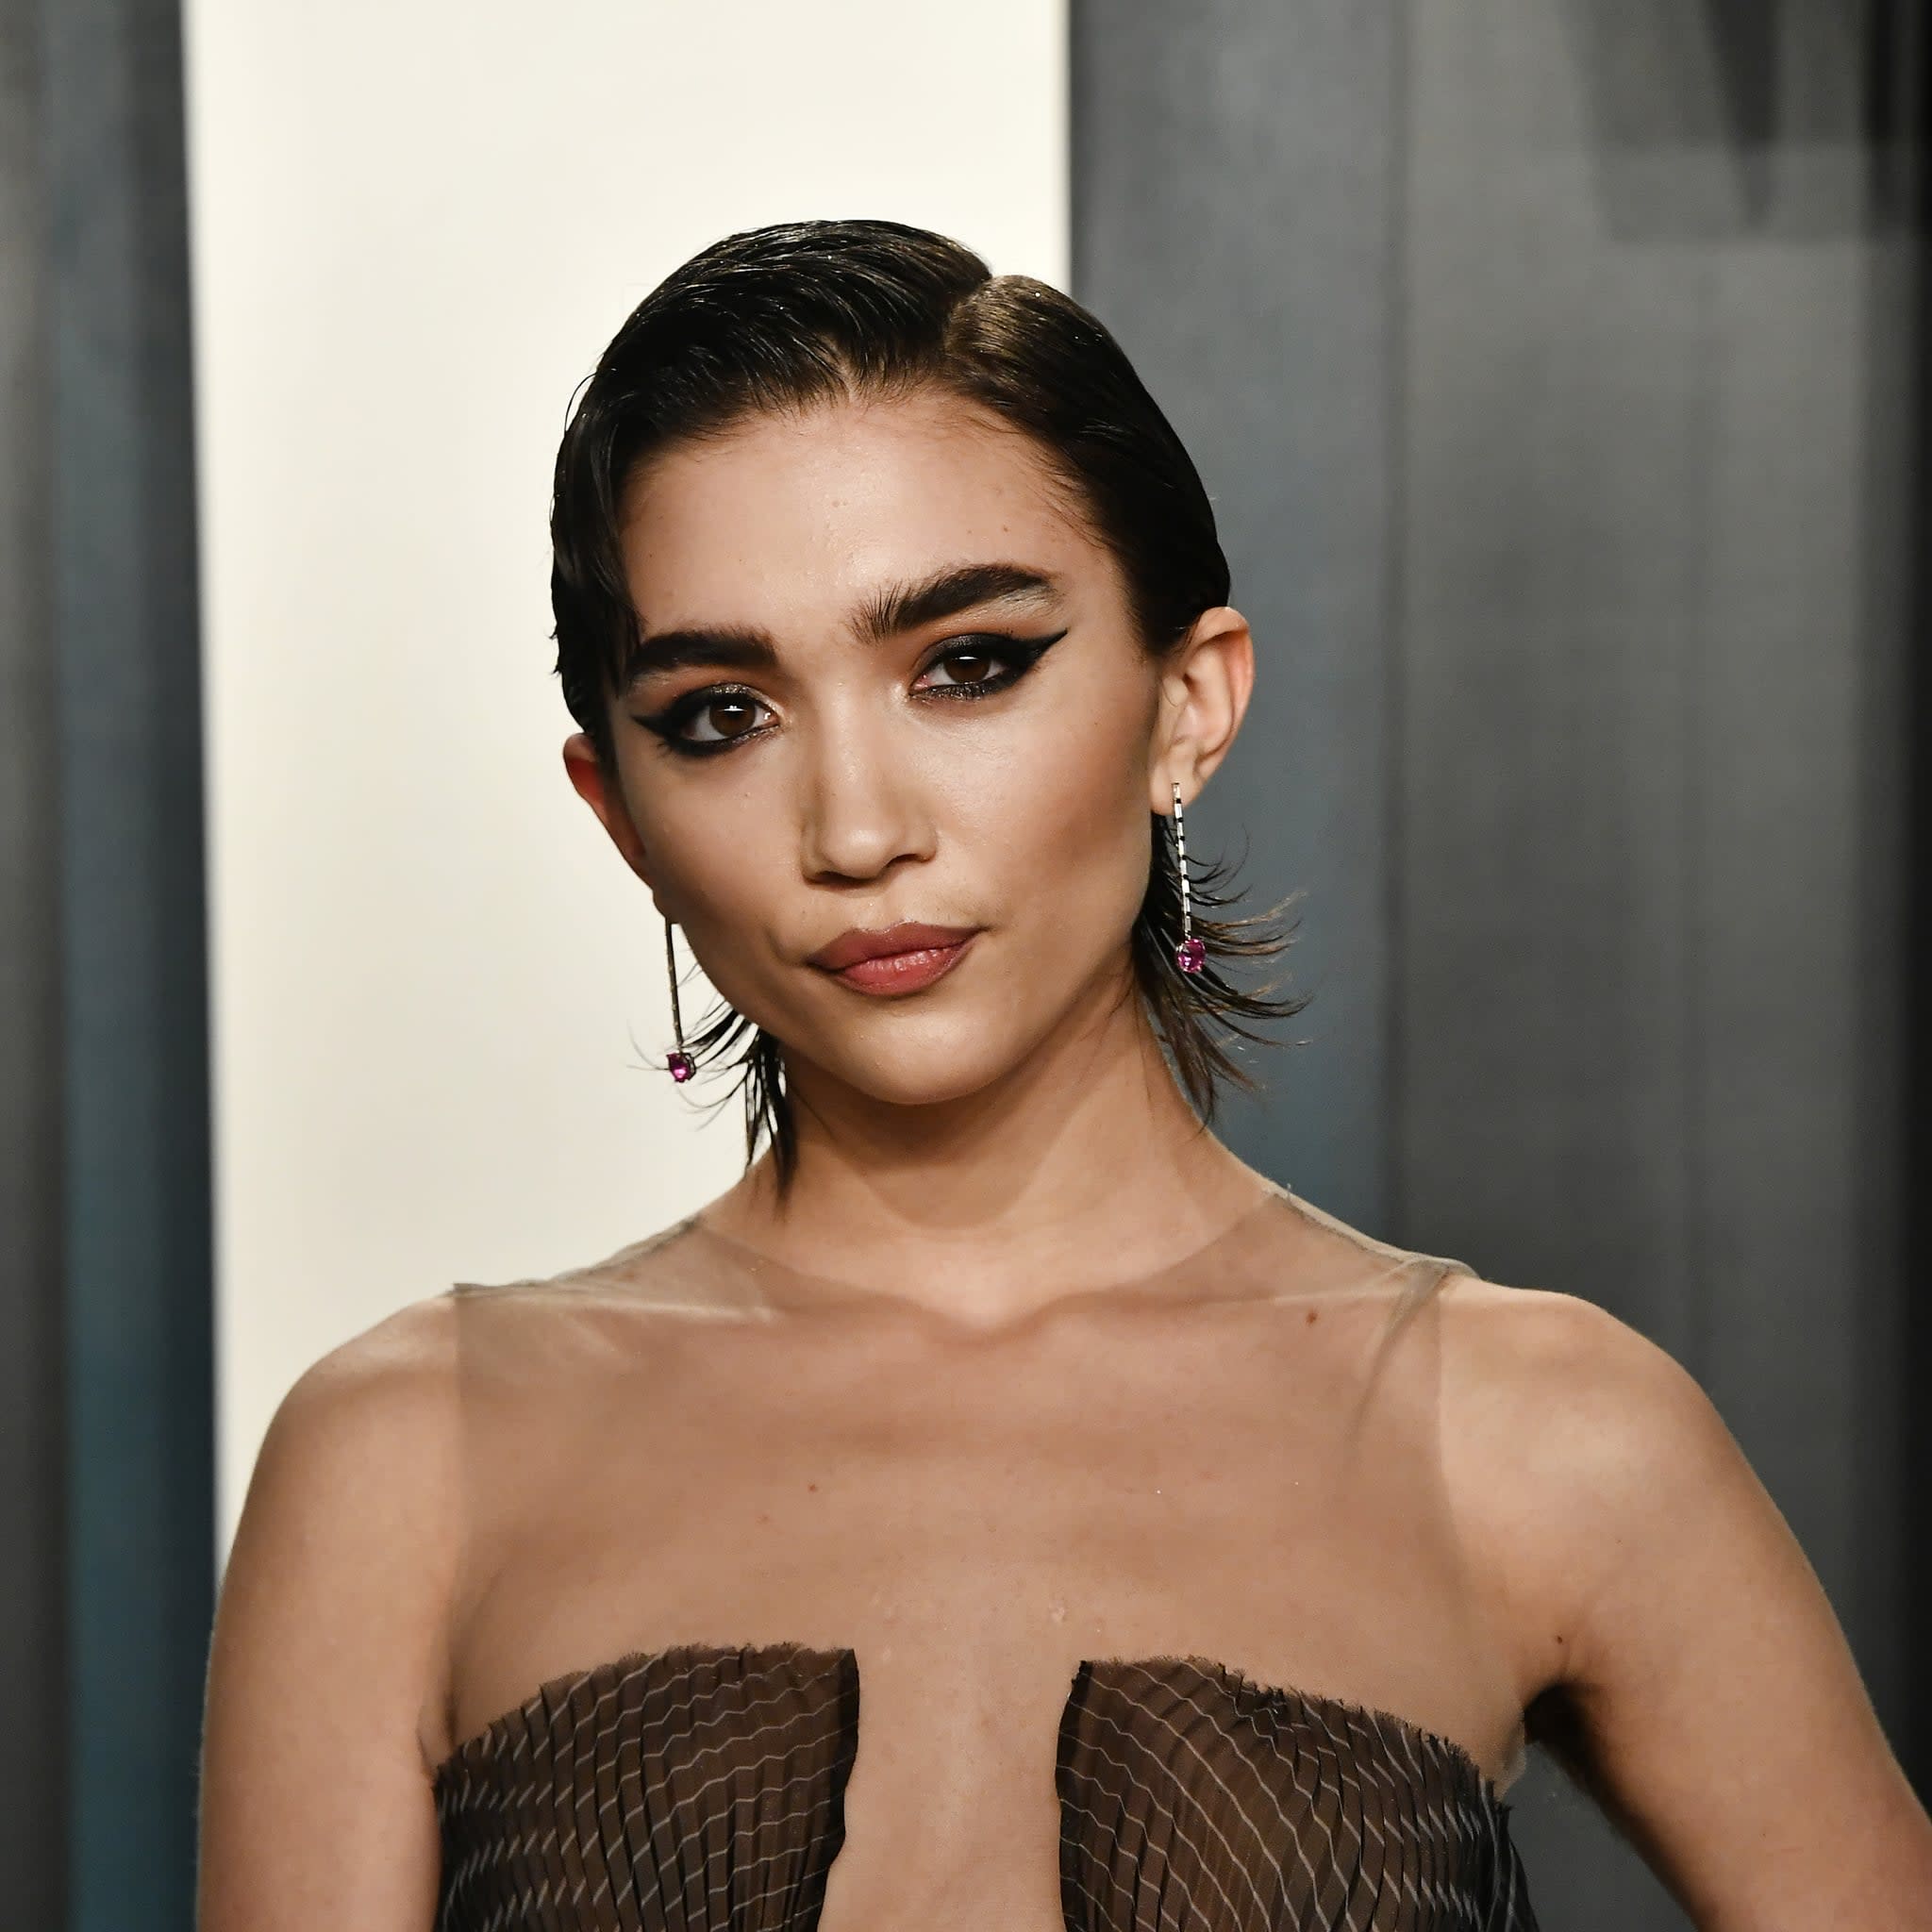 Rowan Blanchard Proudly Showed Her Body Hair In A Photo